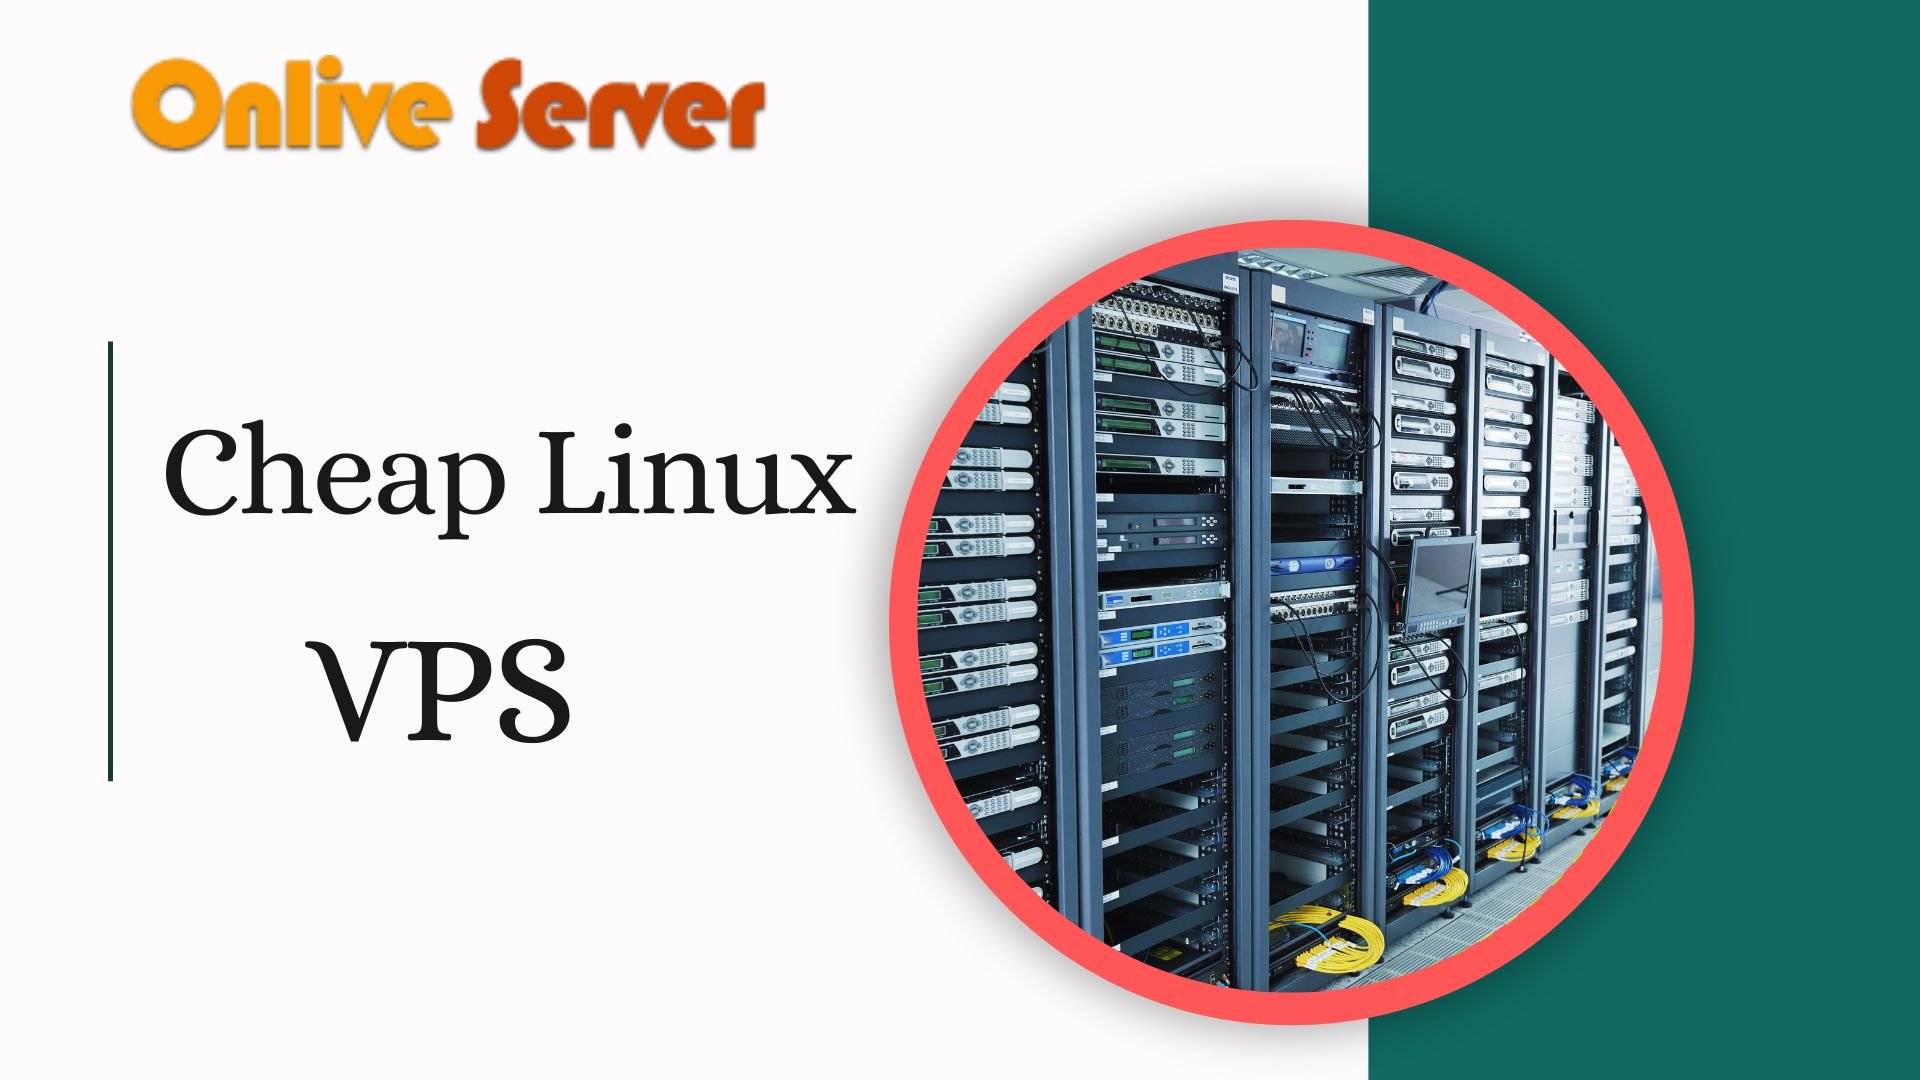 Advantages of the usage of a Cheap Linux VPS